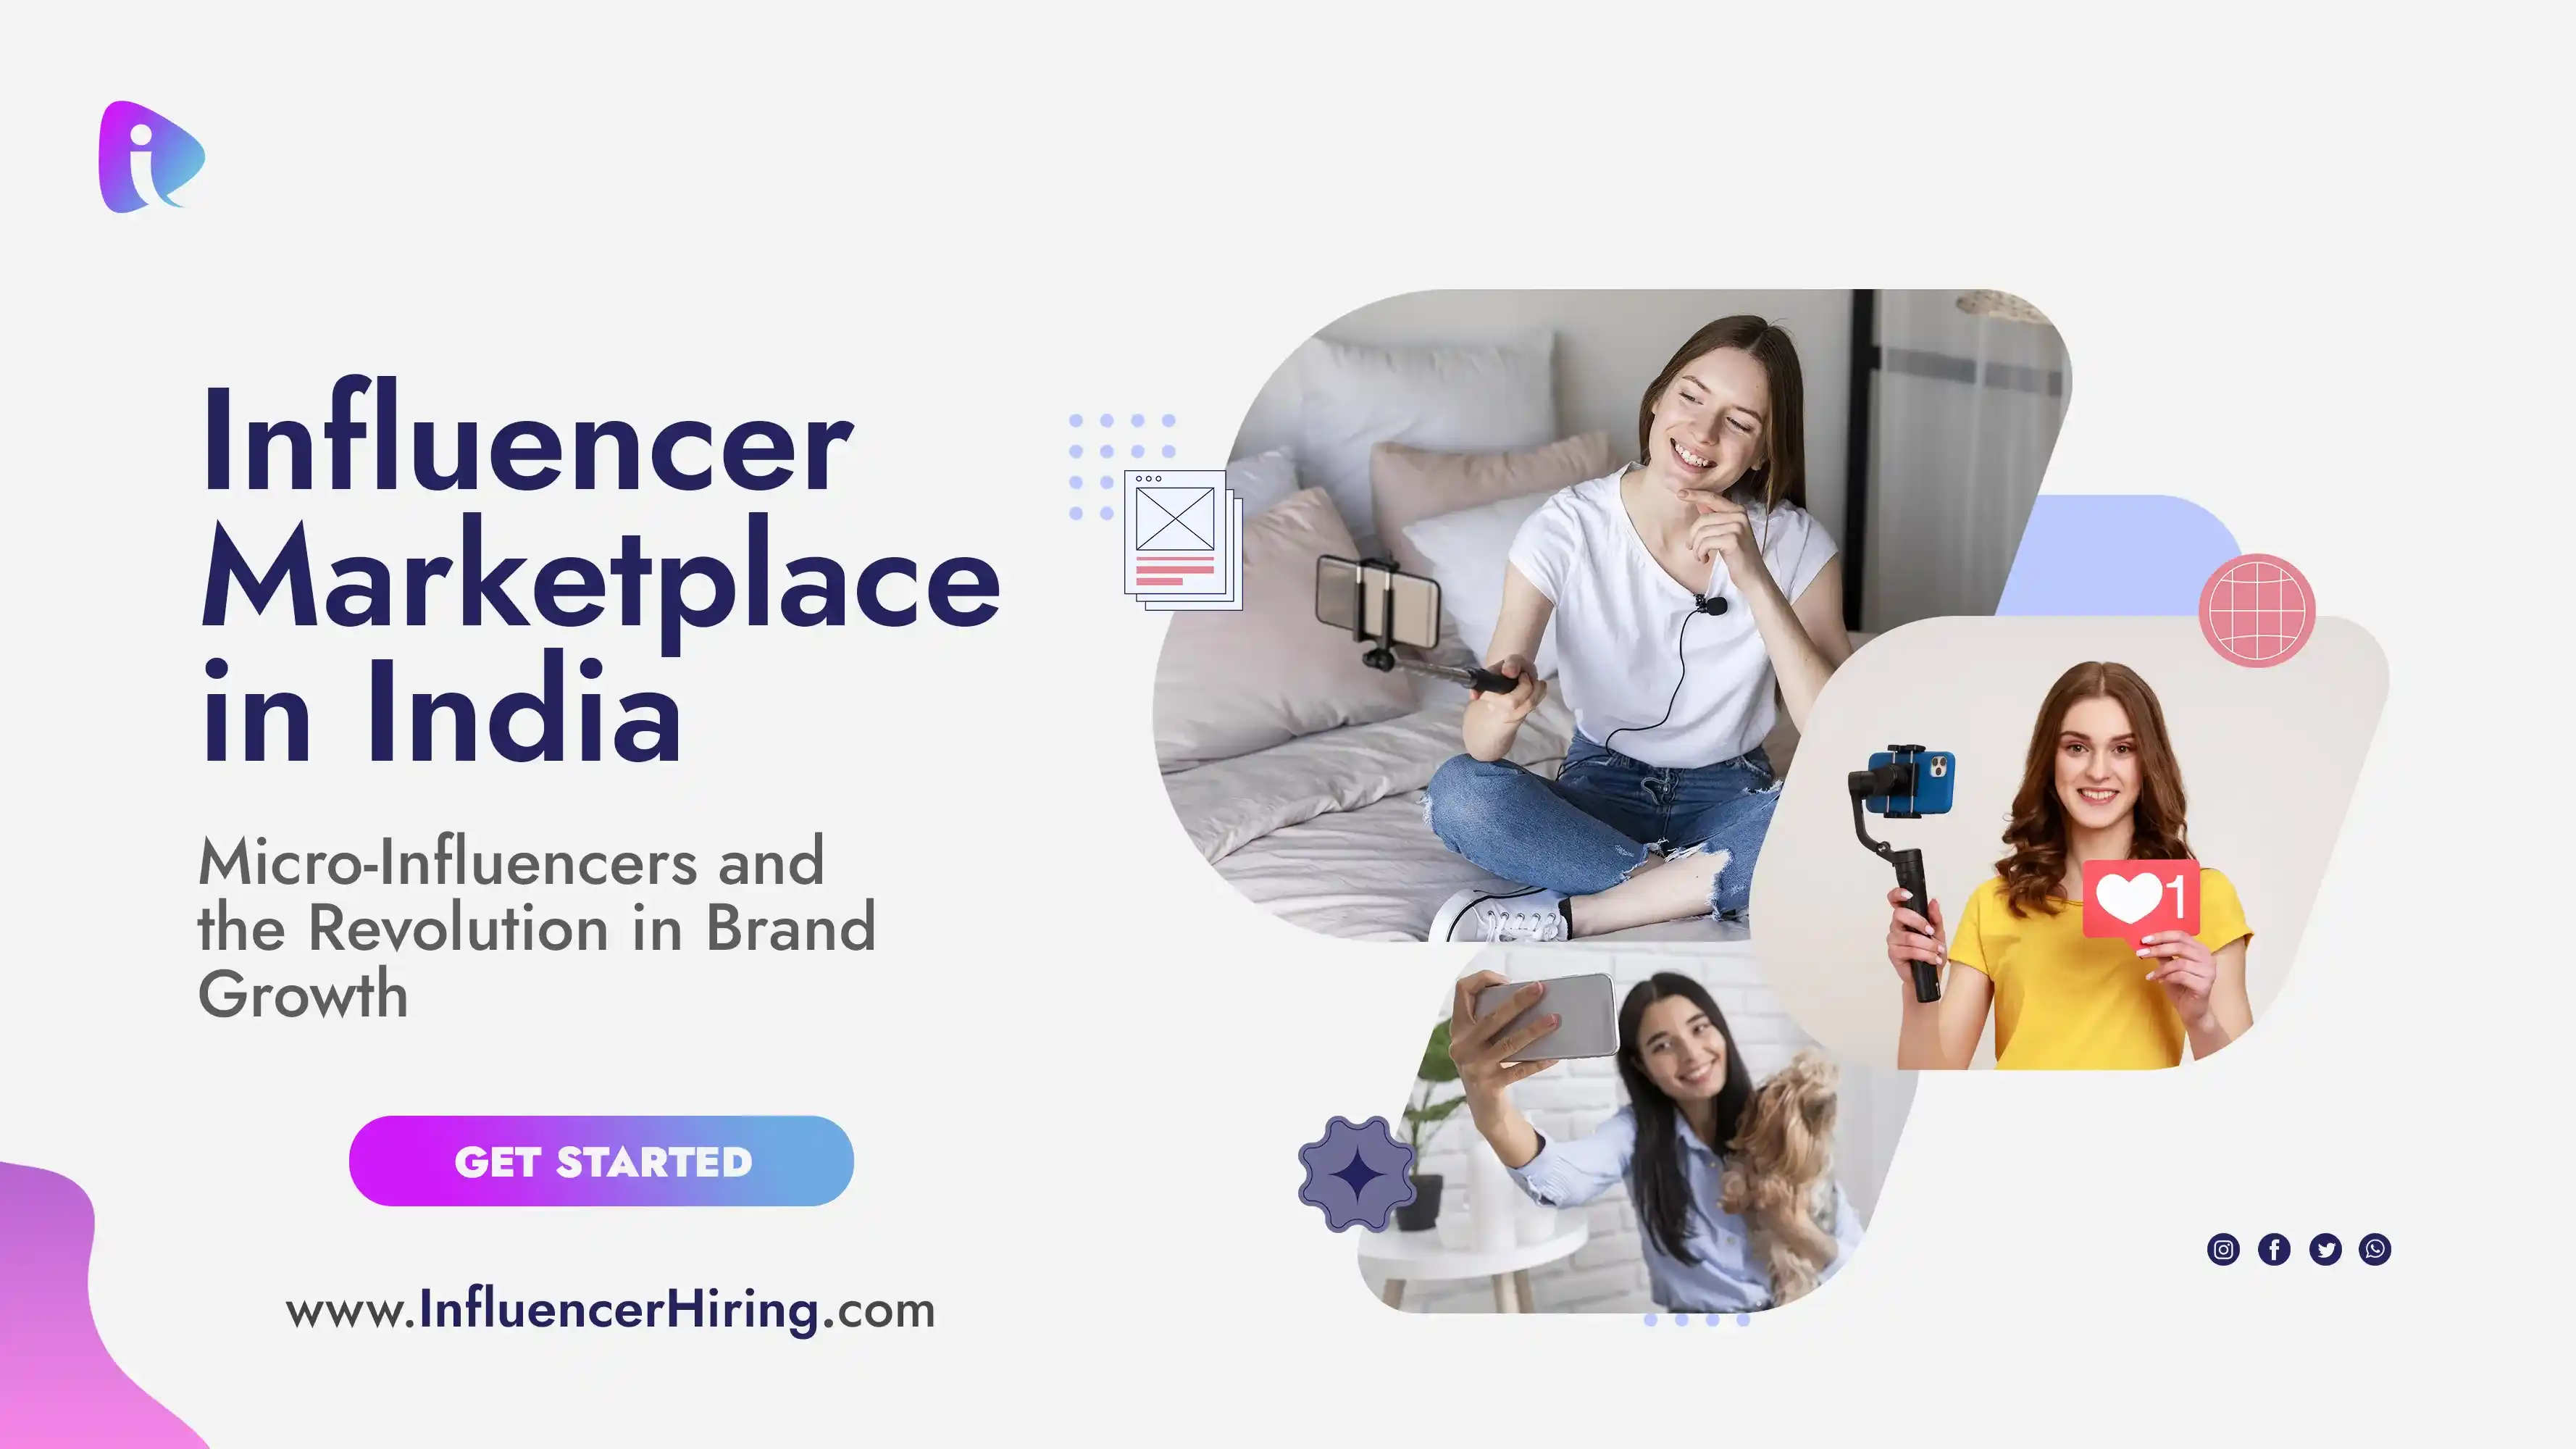 Discover India's Premier Influencer Marketplaces